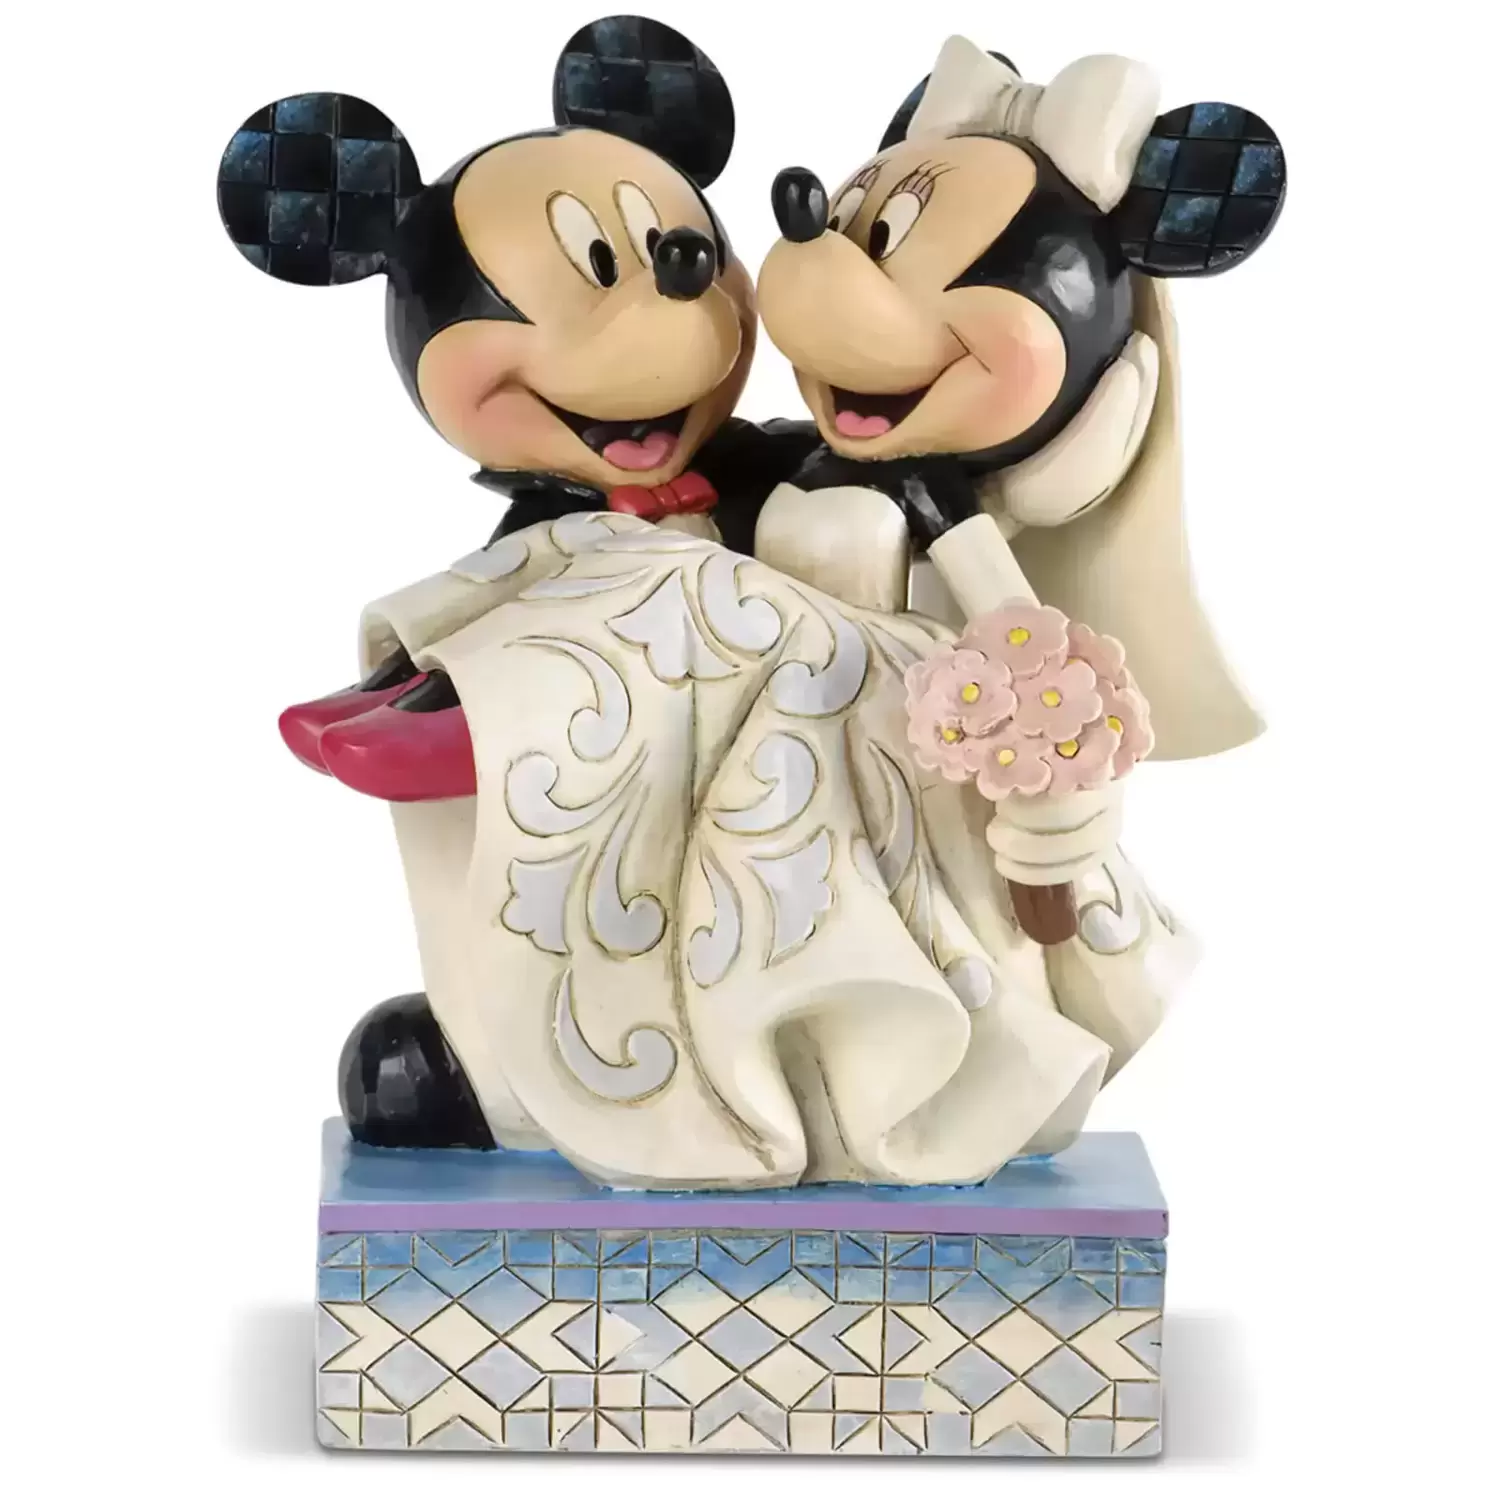 Disney Traditions by Jim Shore - Congratulations Mickey & Minnie Mouse